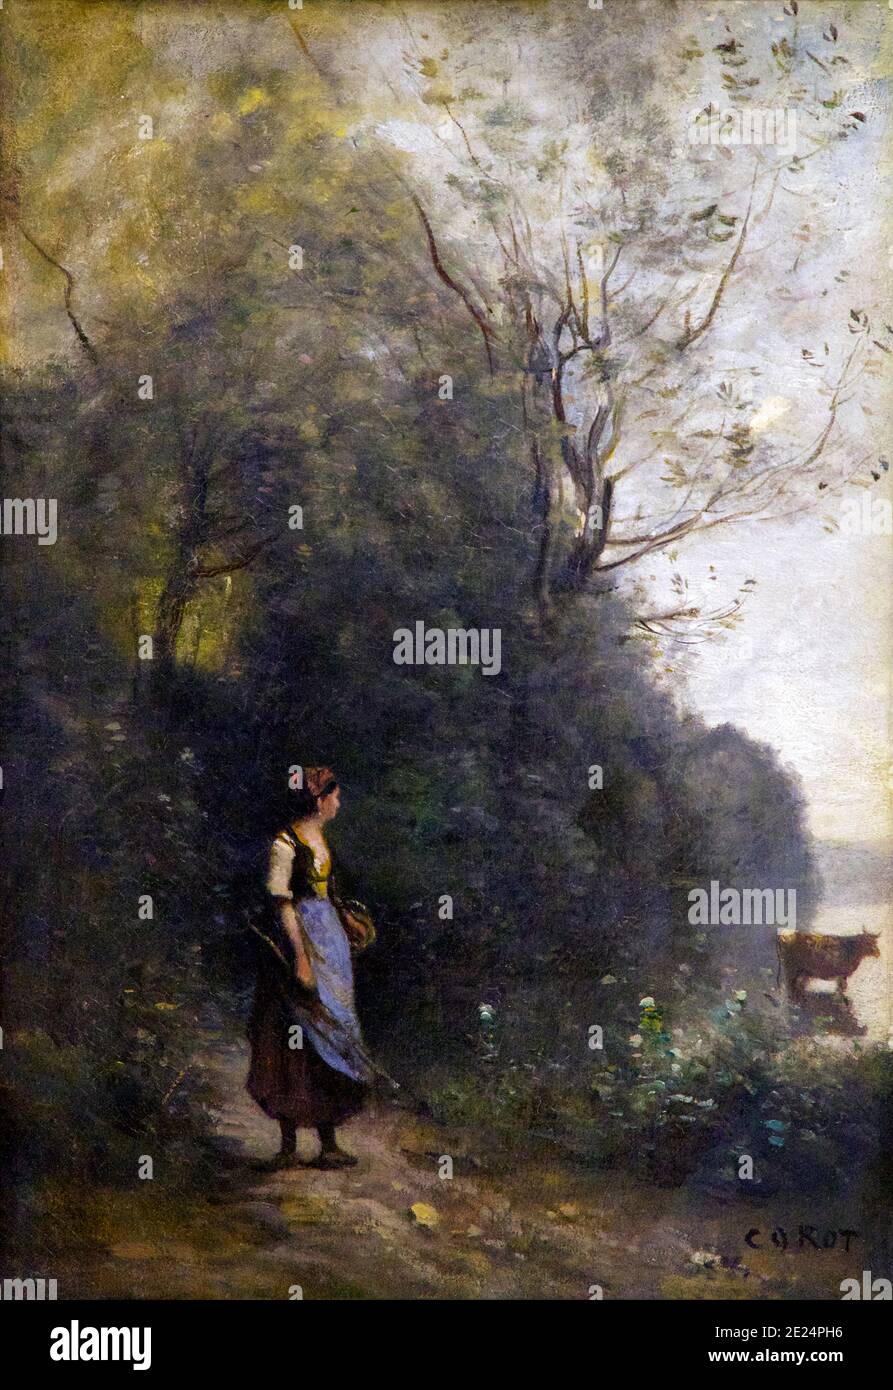 Peasant Girl Grazing a Cow at the Forest, Jean-Baptiste Camille Corot, 1865-1870, State Hermitage Museum, Saint Petersburg, Russia Stock Photo